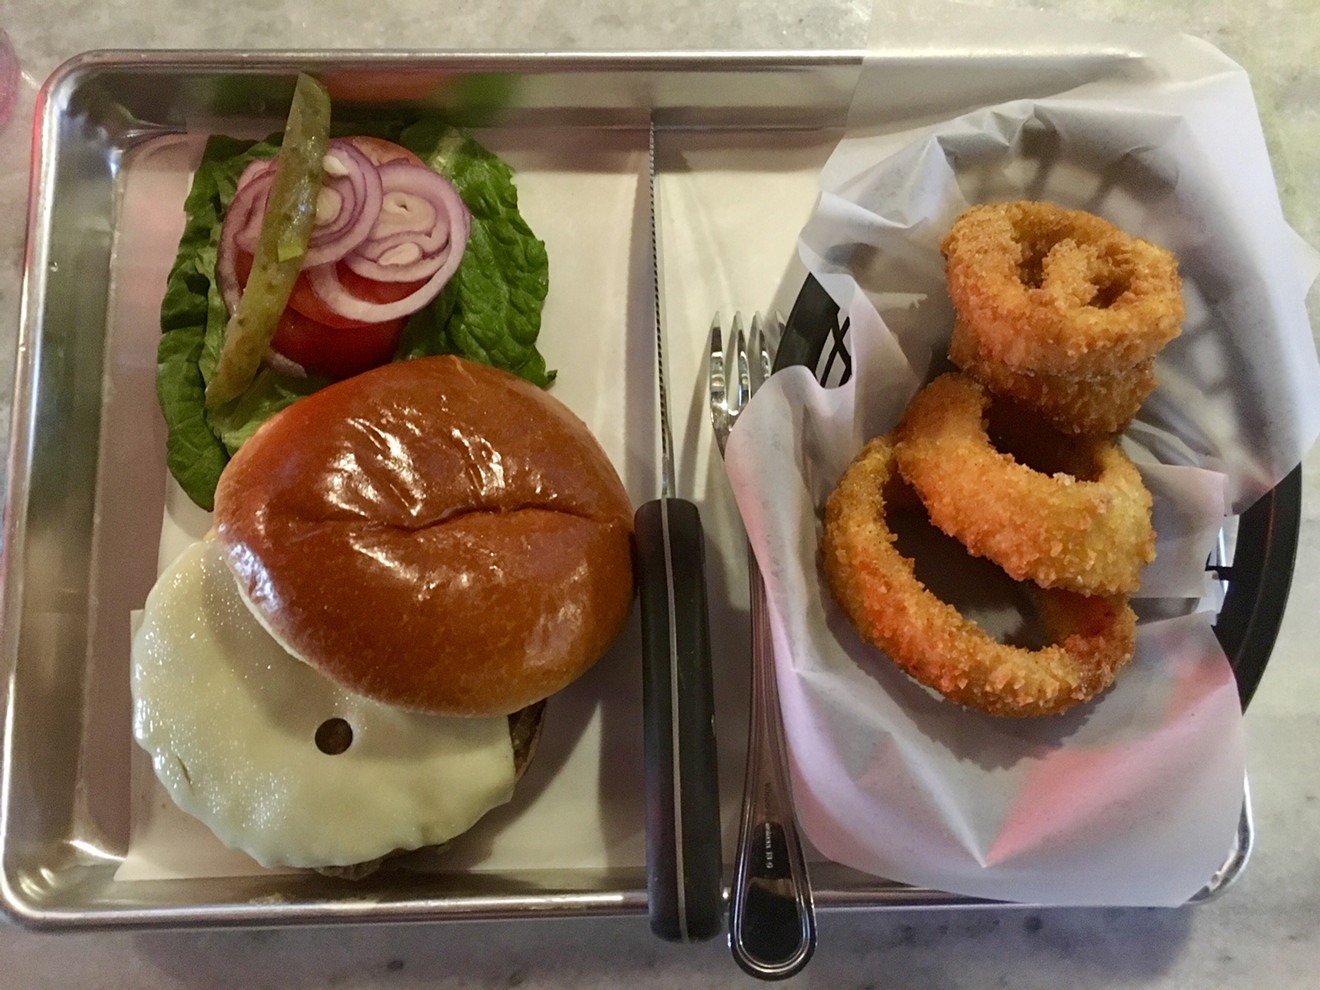 The Bison Burger with Swiss cheese and onion rings at the Bison Bar and Grill for $13.50